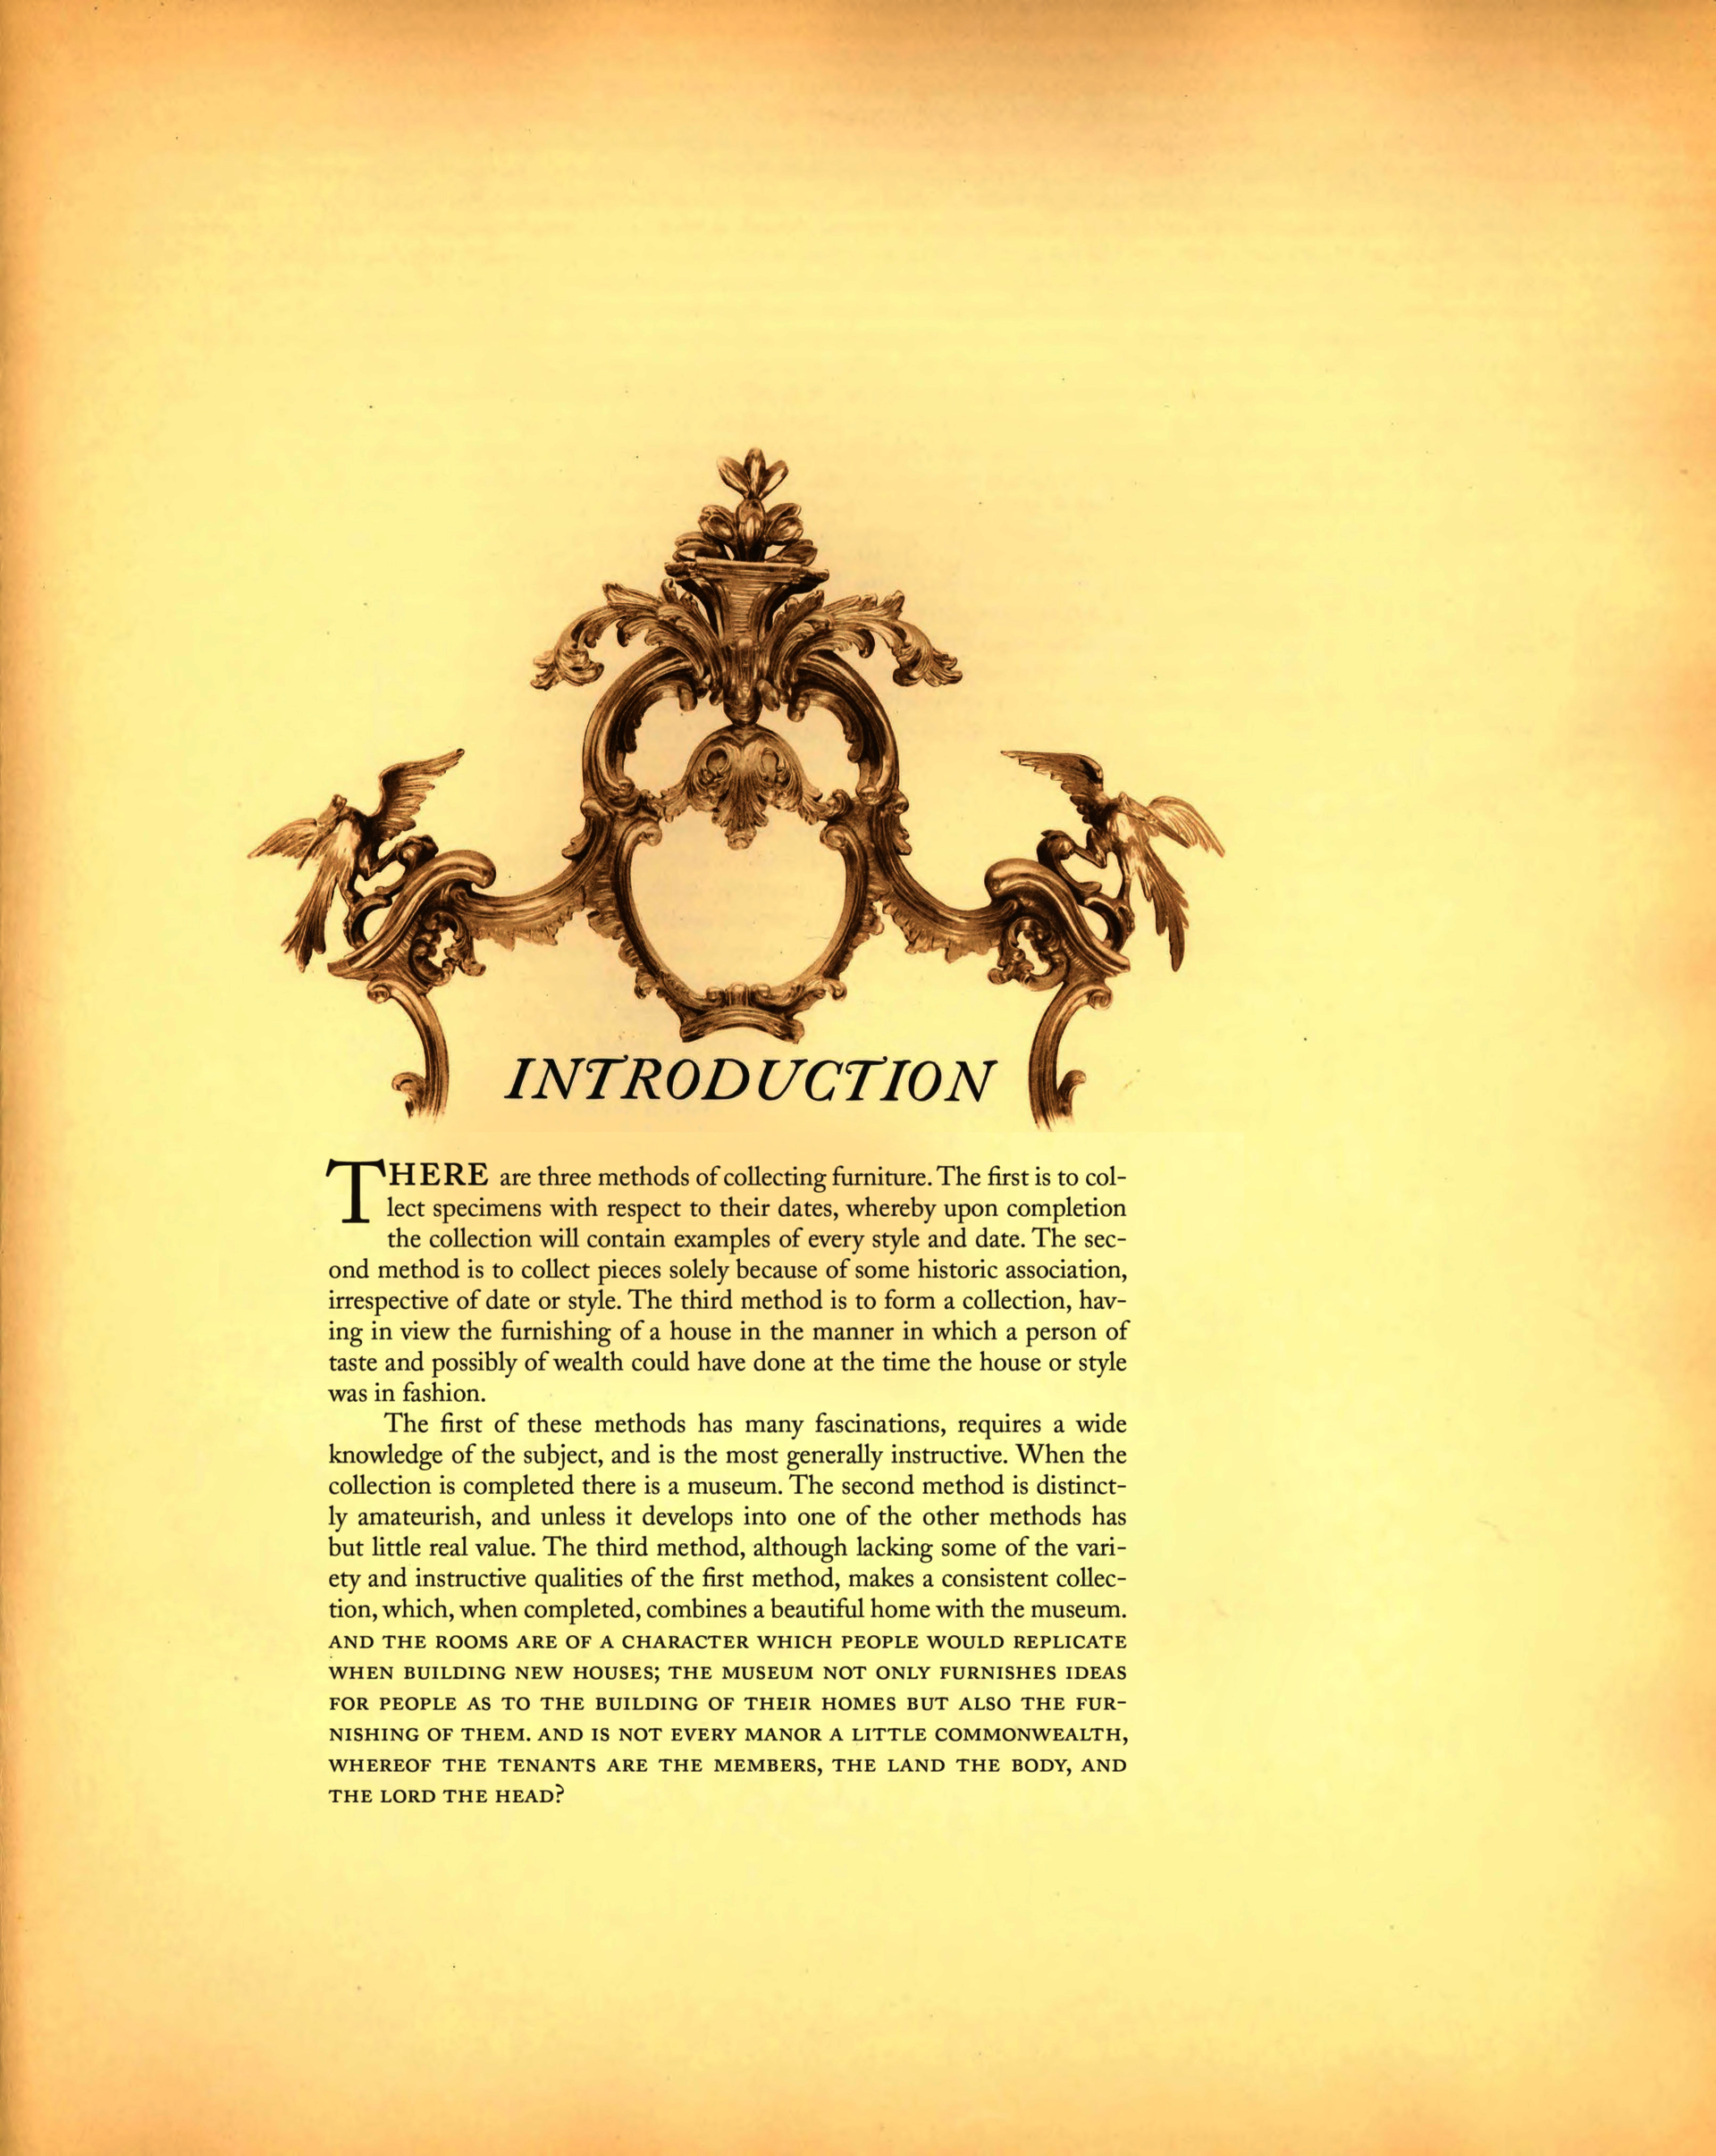 Pendleton Collection Catalog: Ornate photogravure of a frame surrounds the title "Introduction", followed by introductory text